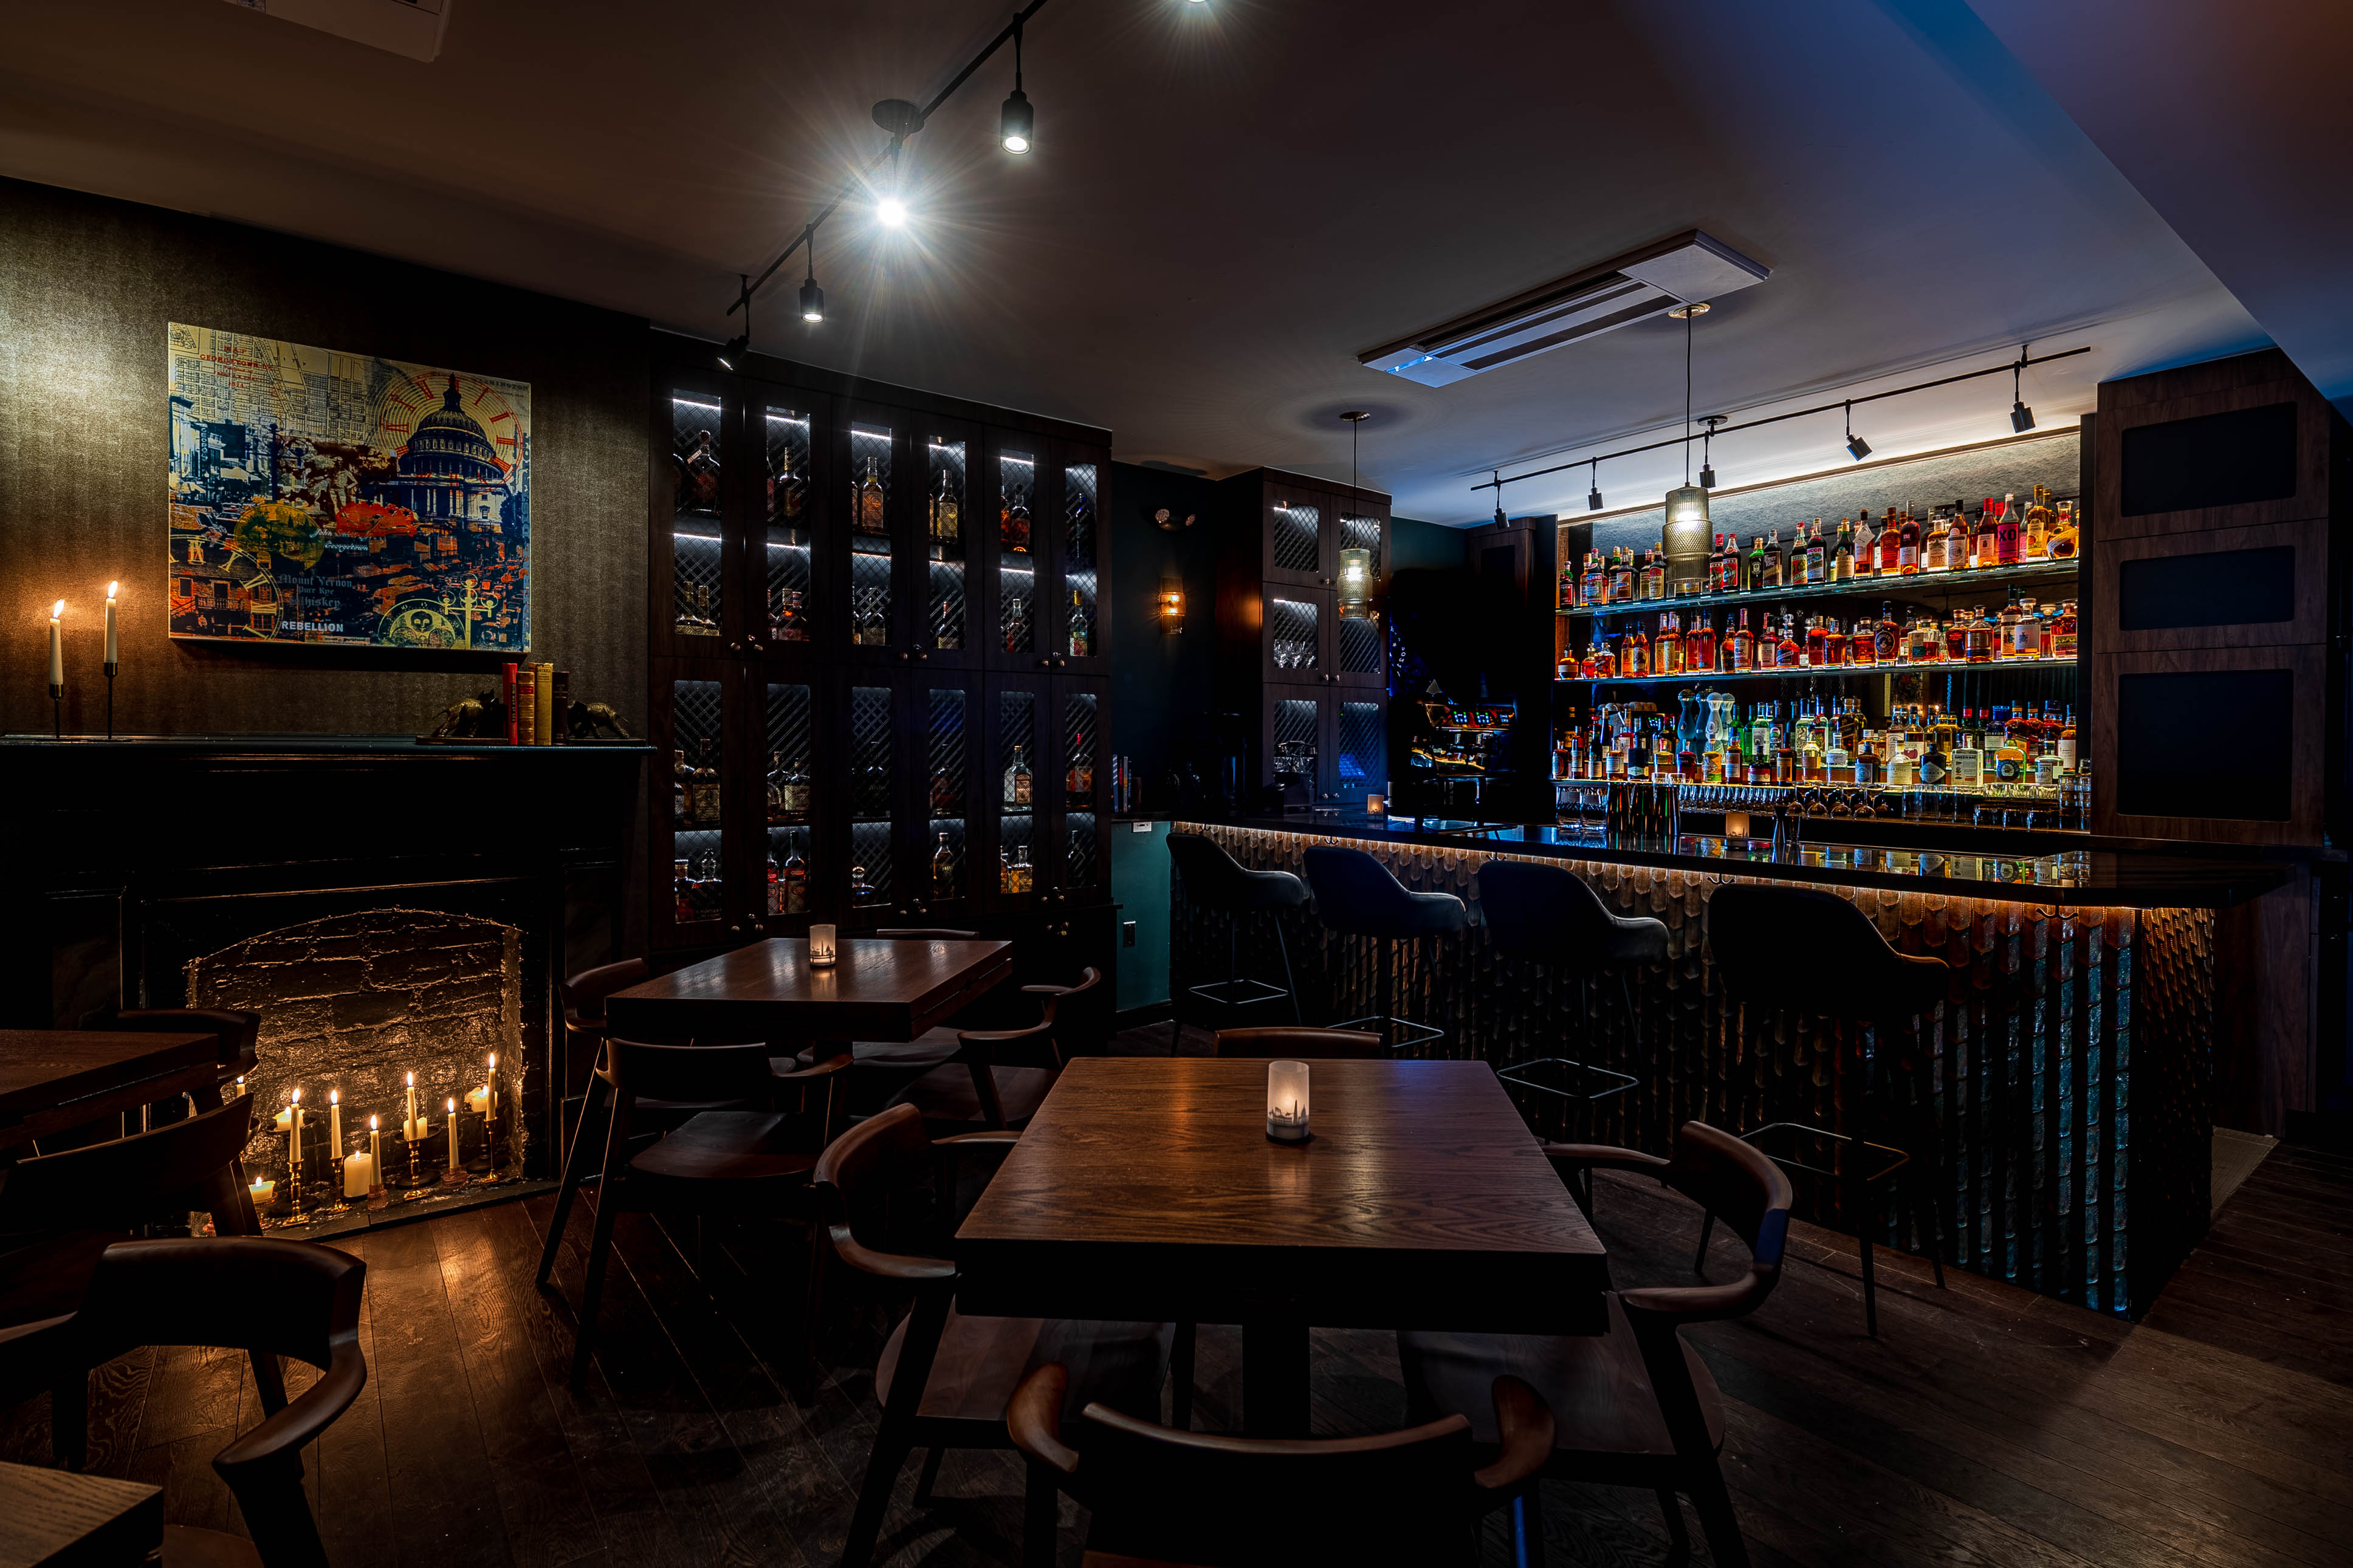 A glowing bar lined with lockers and spirits